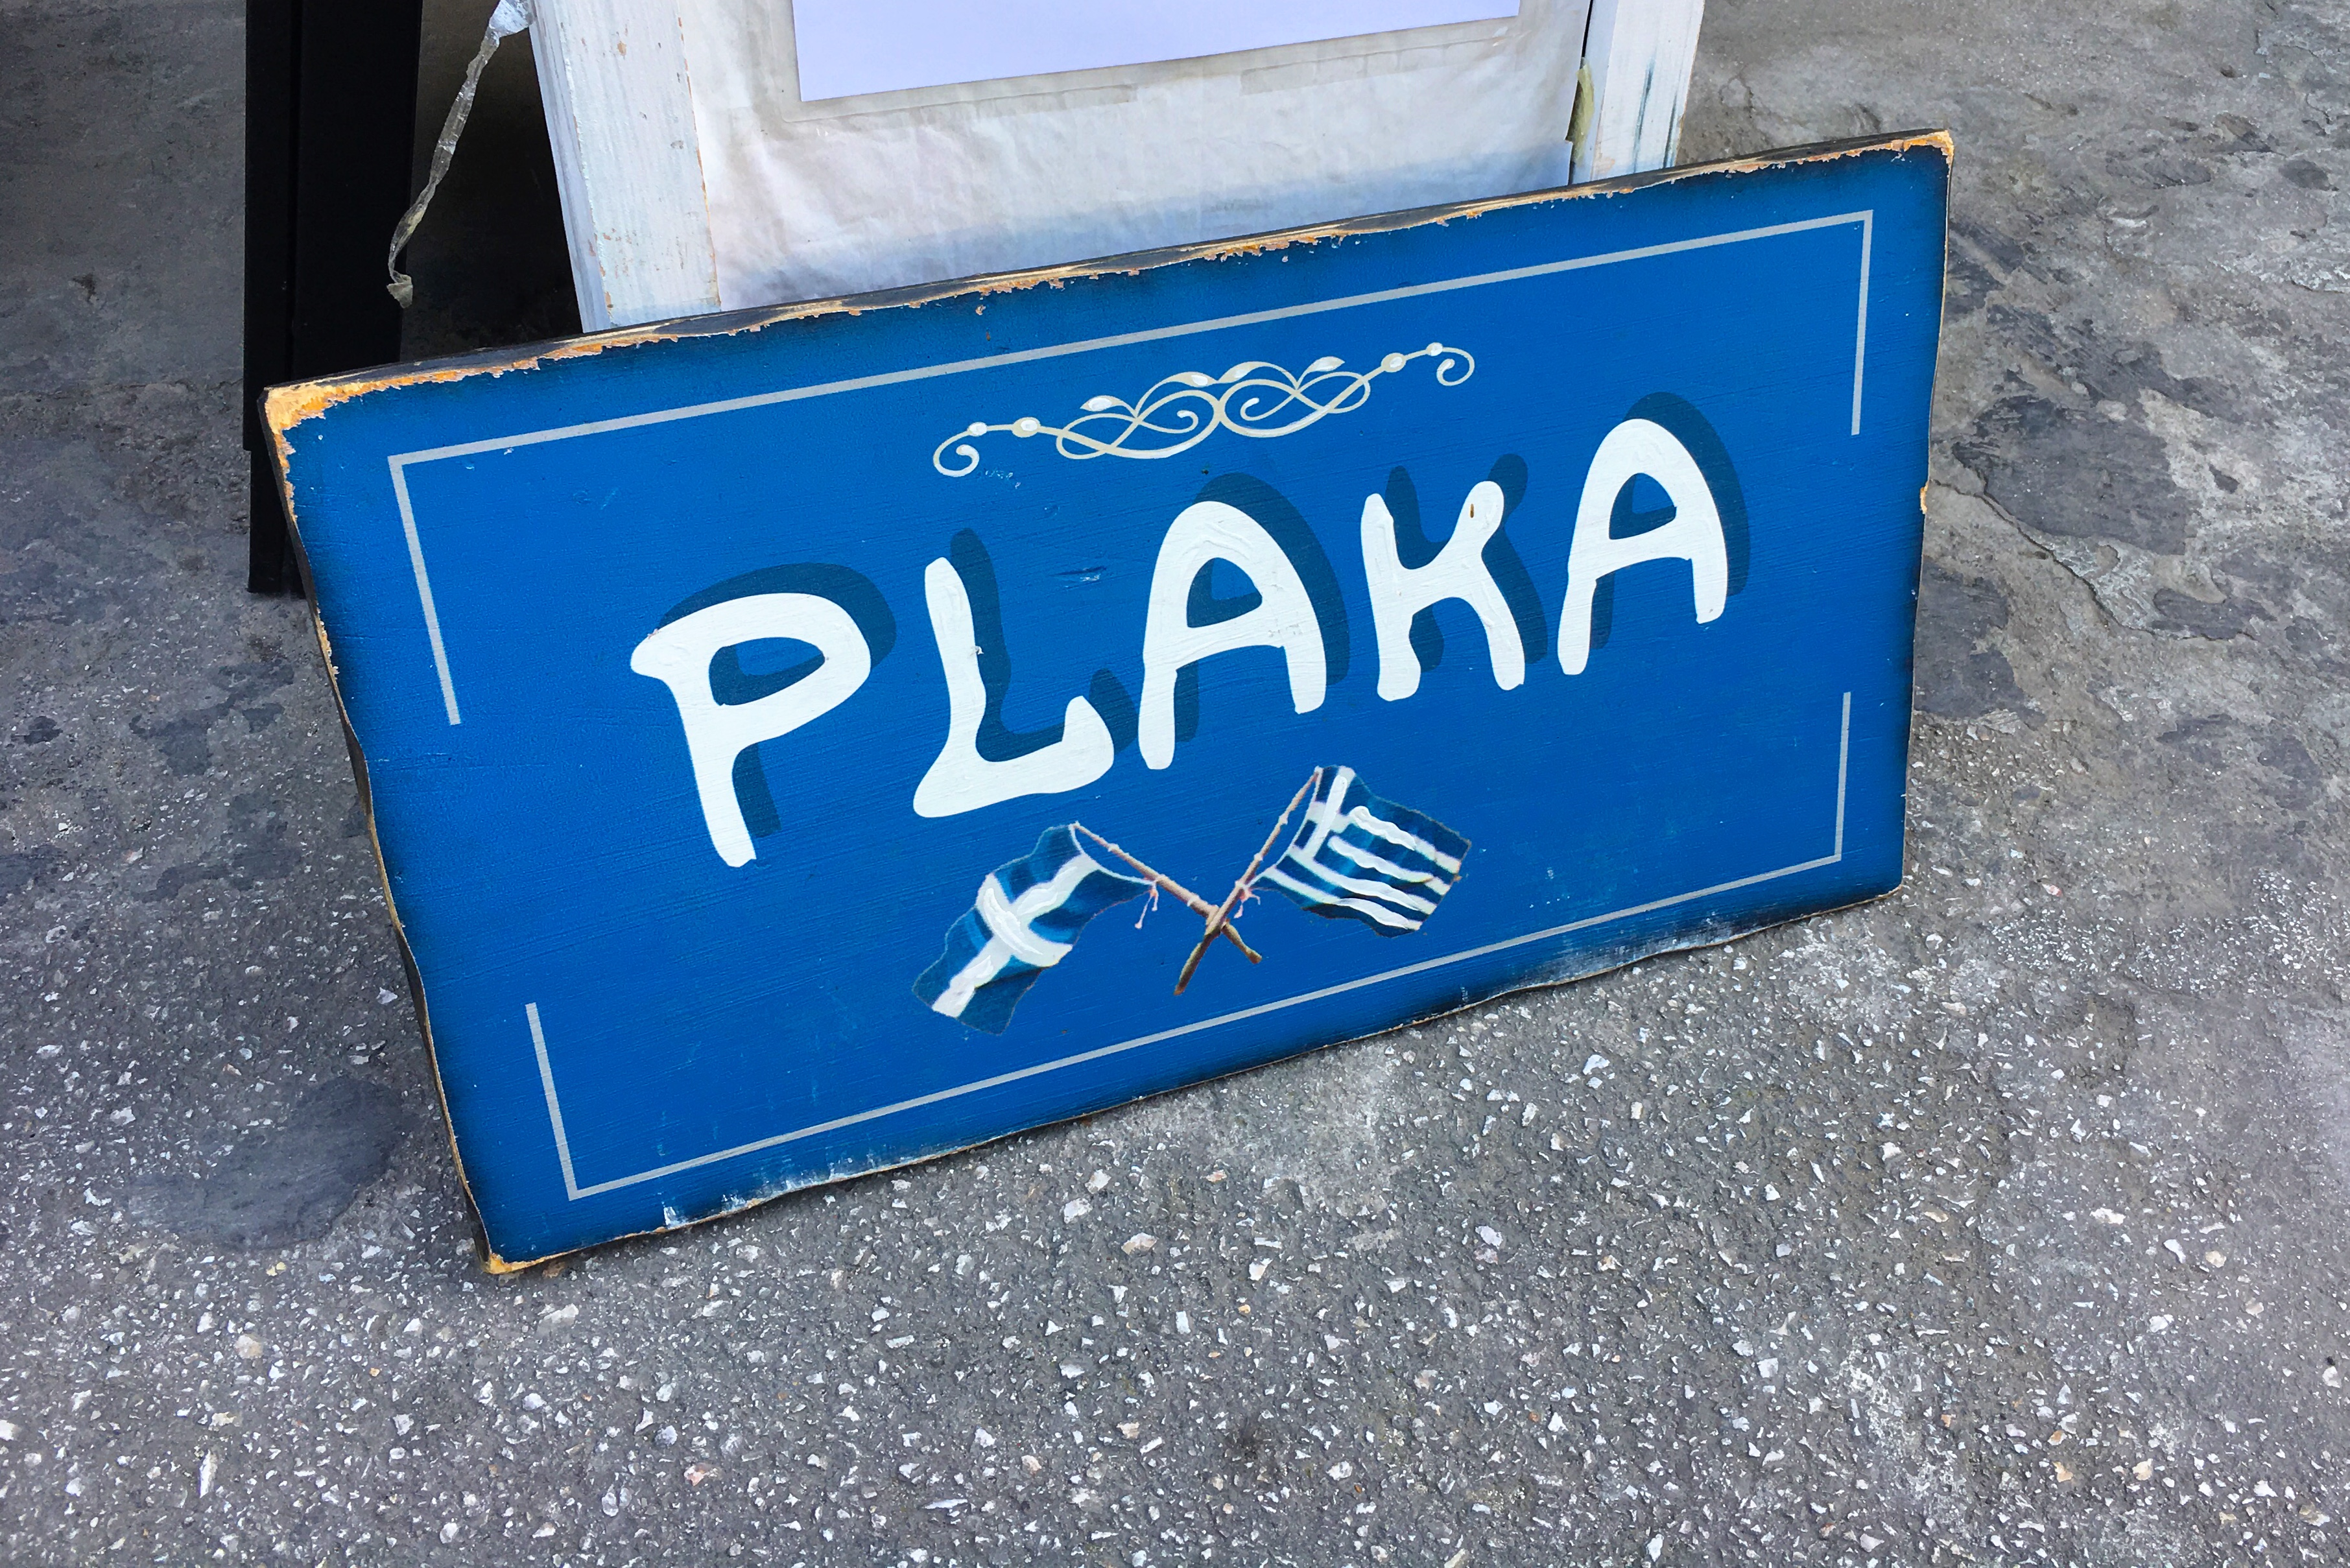 Plaka is a neighborhood in Athens, Greece with plenty of shopping, restaurants, and bars